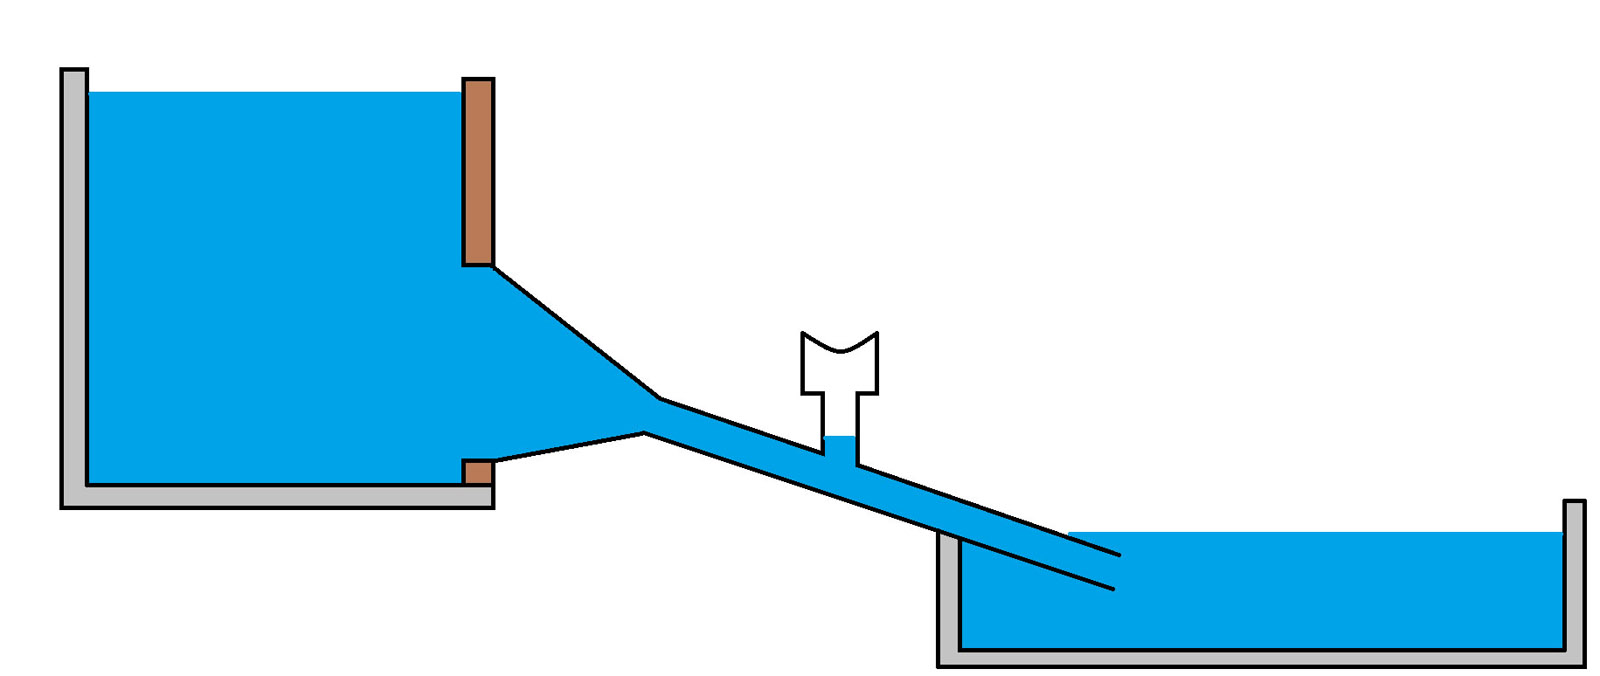 Cross section of the Venturi tube. When the water flows through the uptake tube, negative  pressure builds that forces the elastomer film (center of the image) to extend inwards.